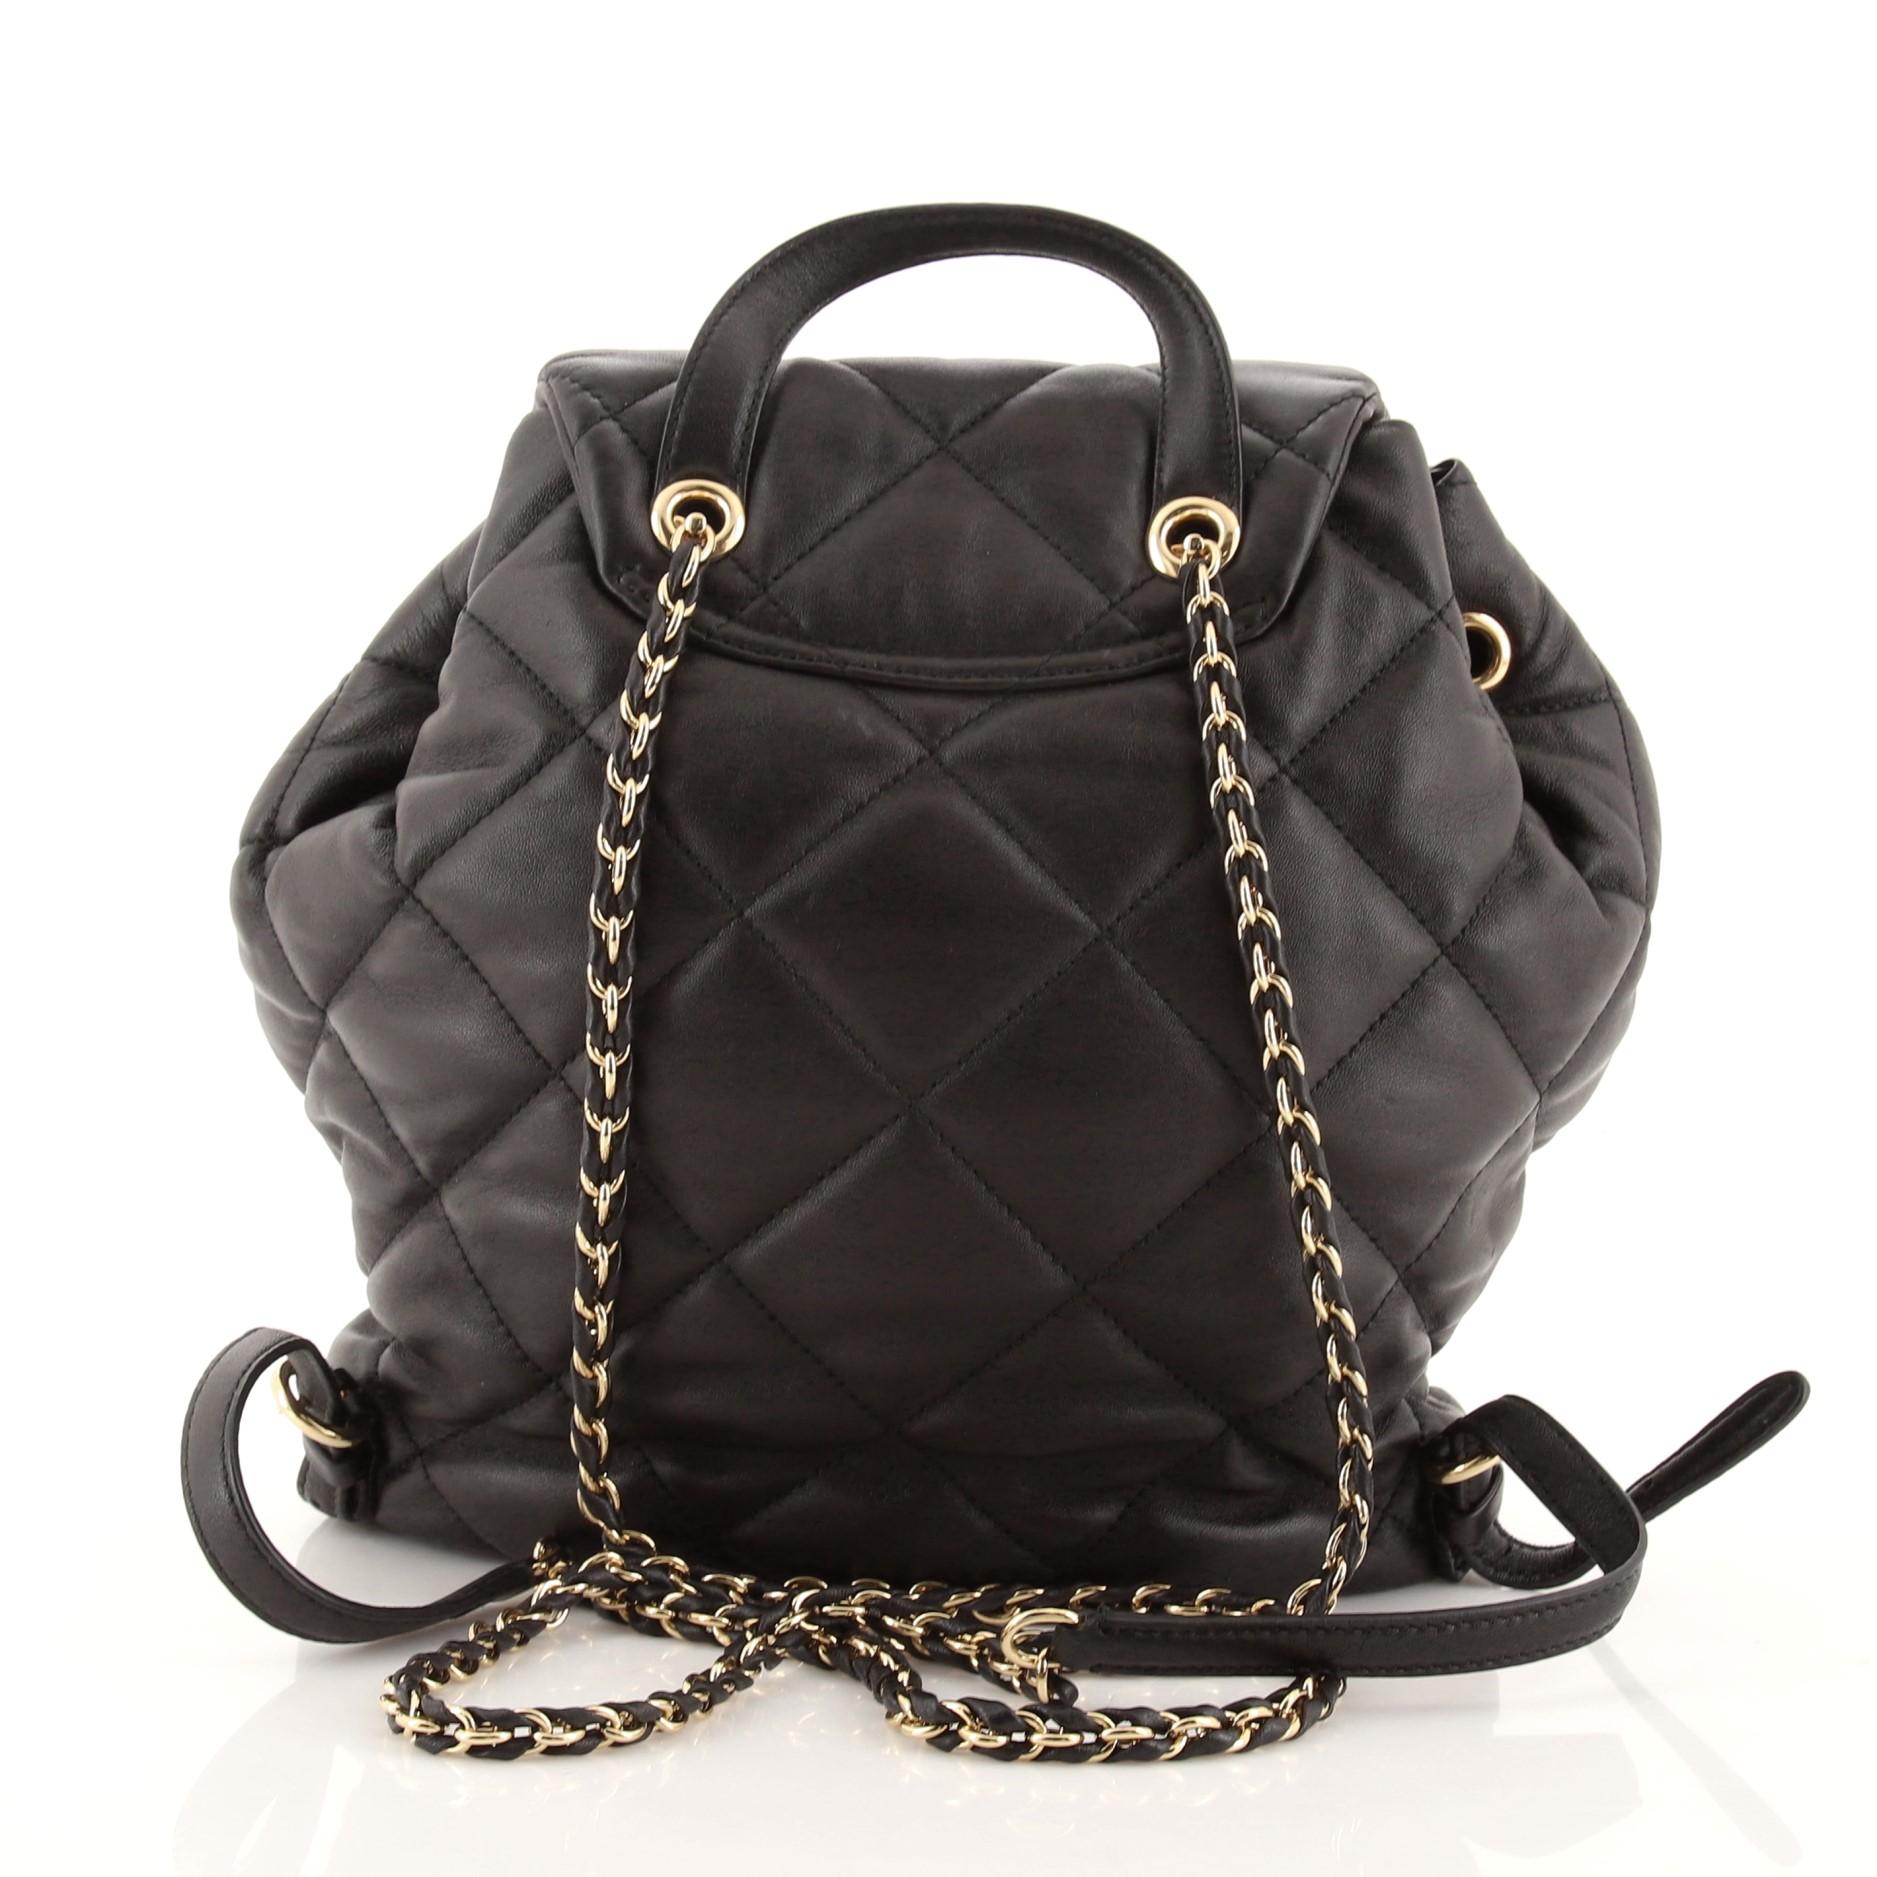 Black Salvatore Ferragamo Giuliette Backpack Quilted Leather